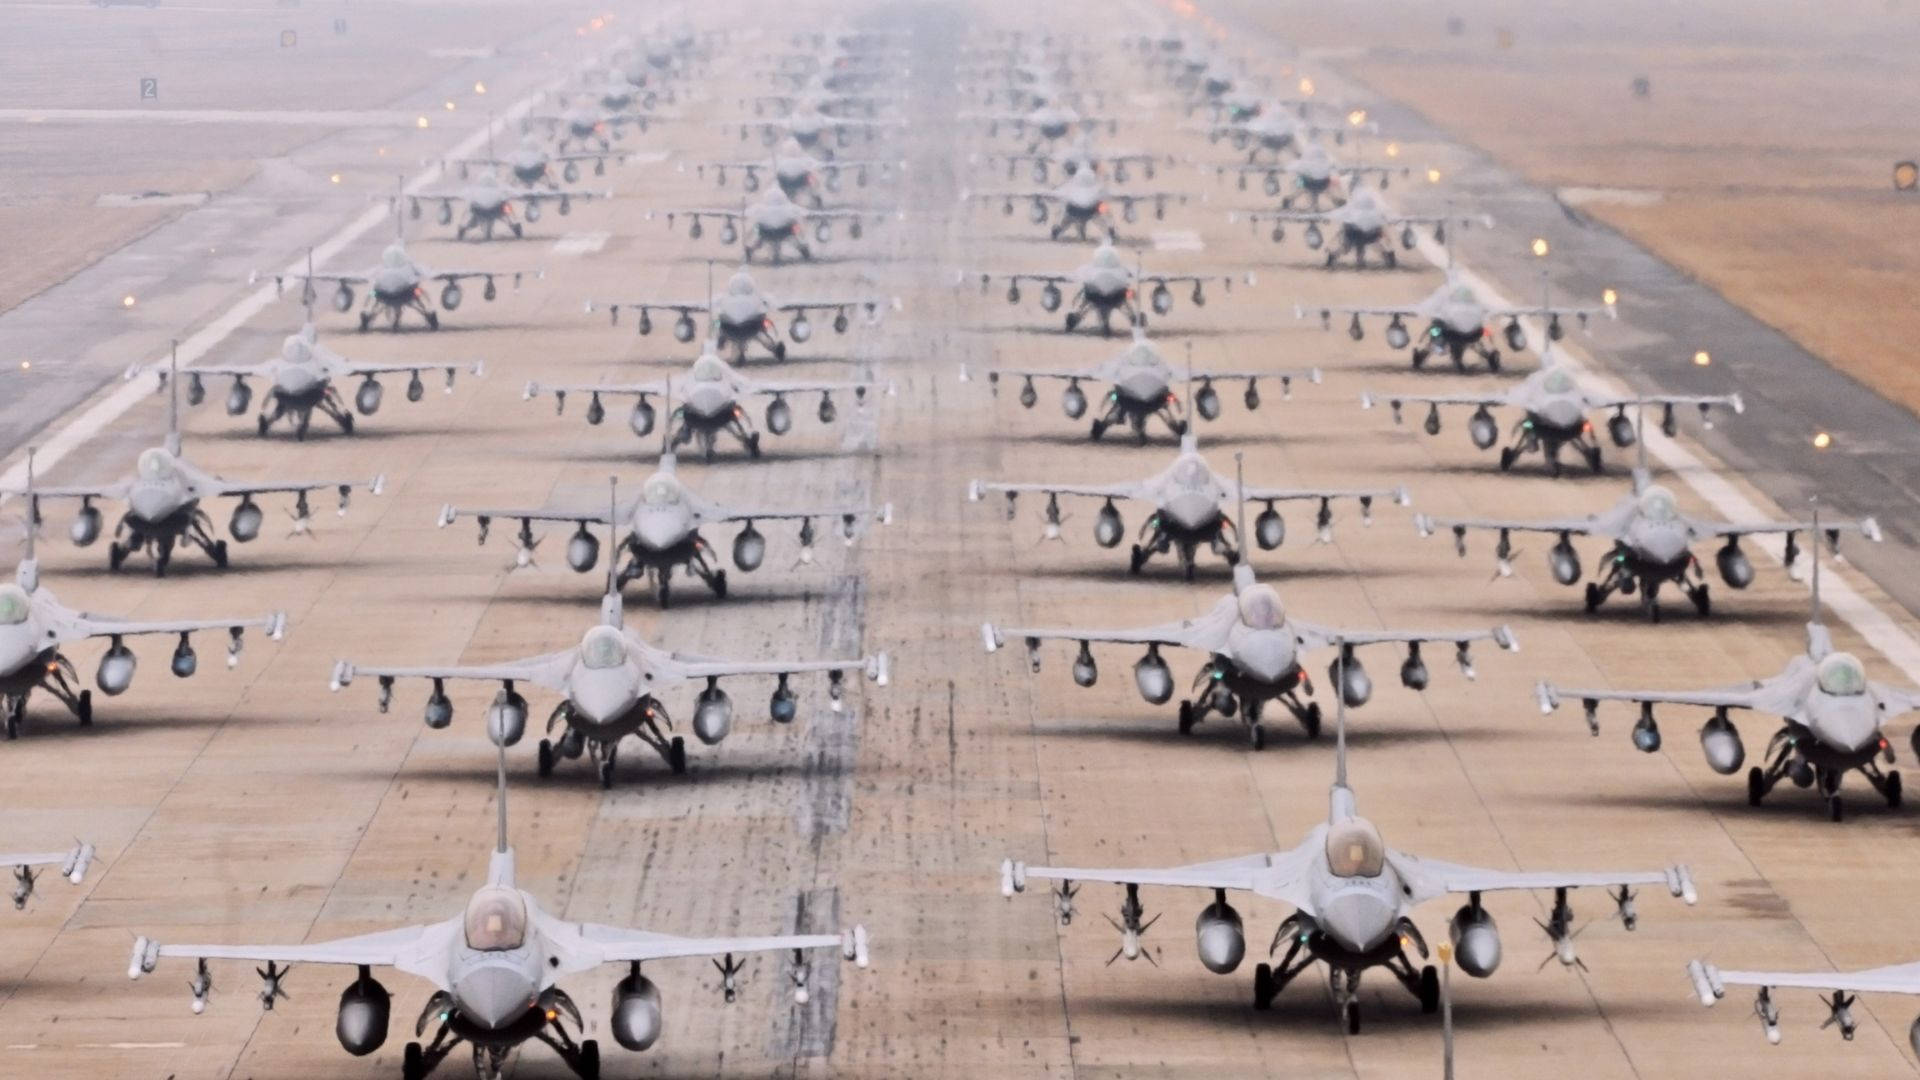 Jets On Runway Background